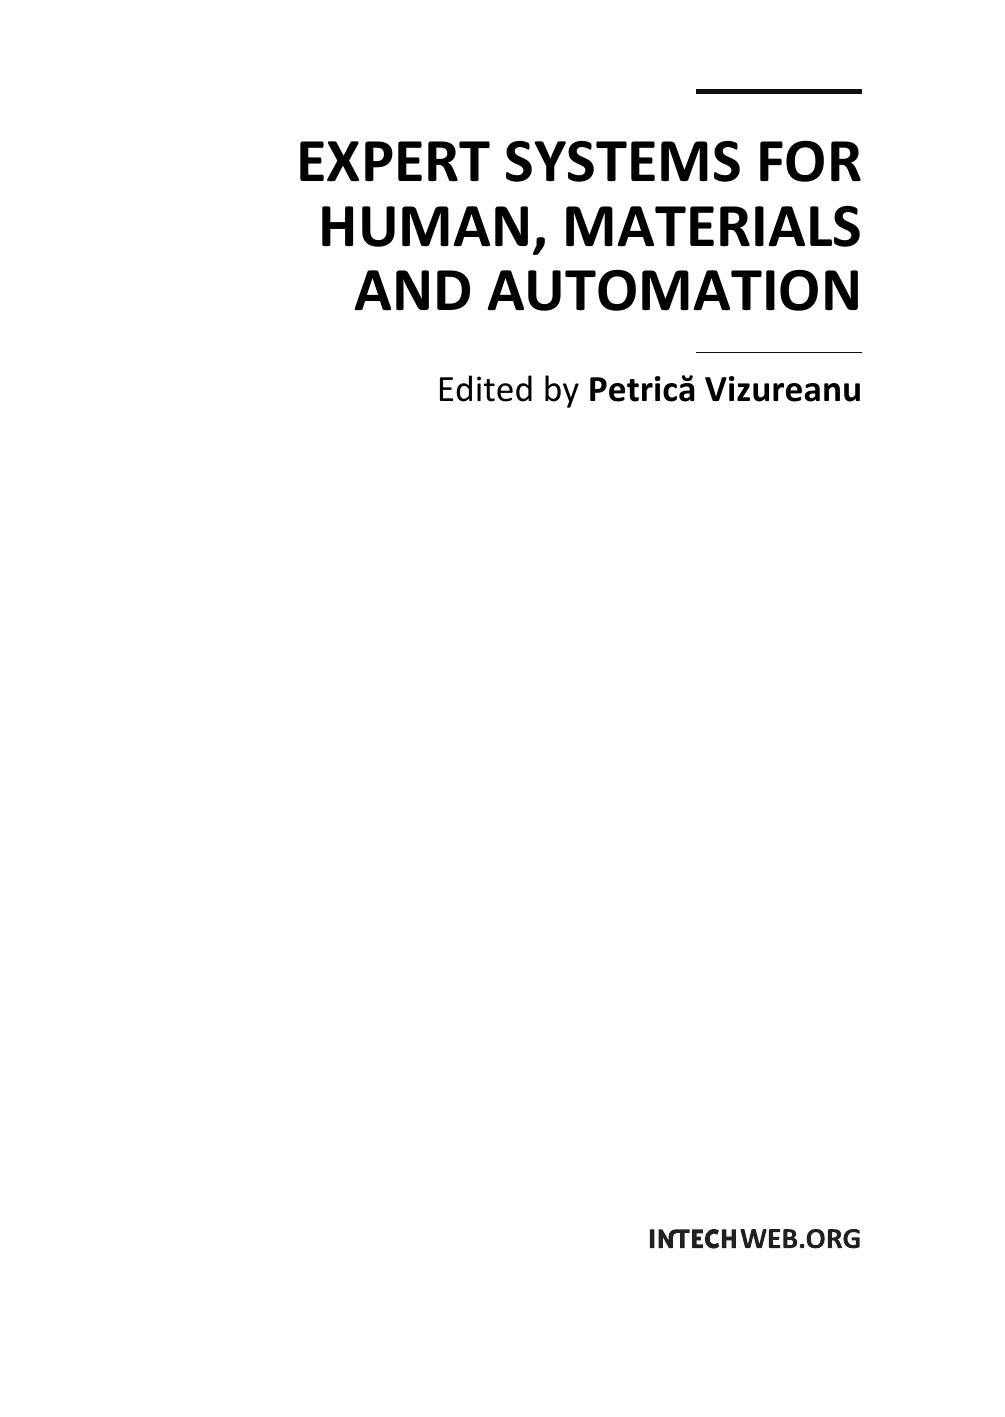 Microsoft Word - preface_Expert Systems for Human, Materials and Automation